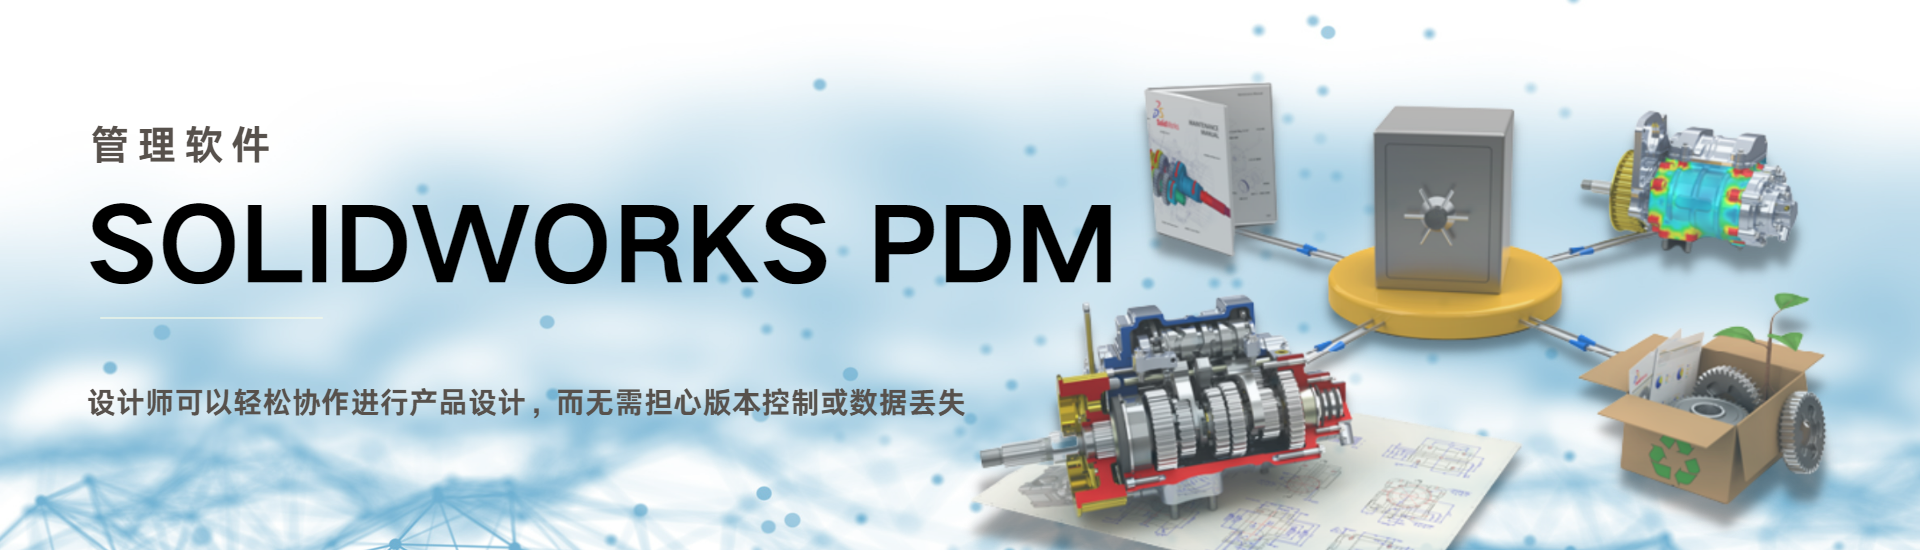 solidworks pdm.png